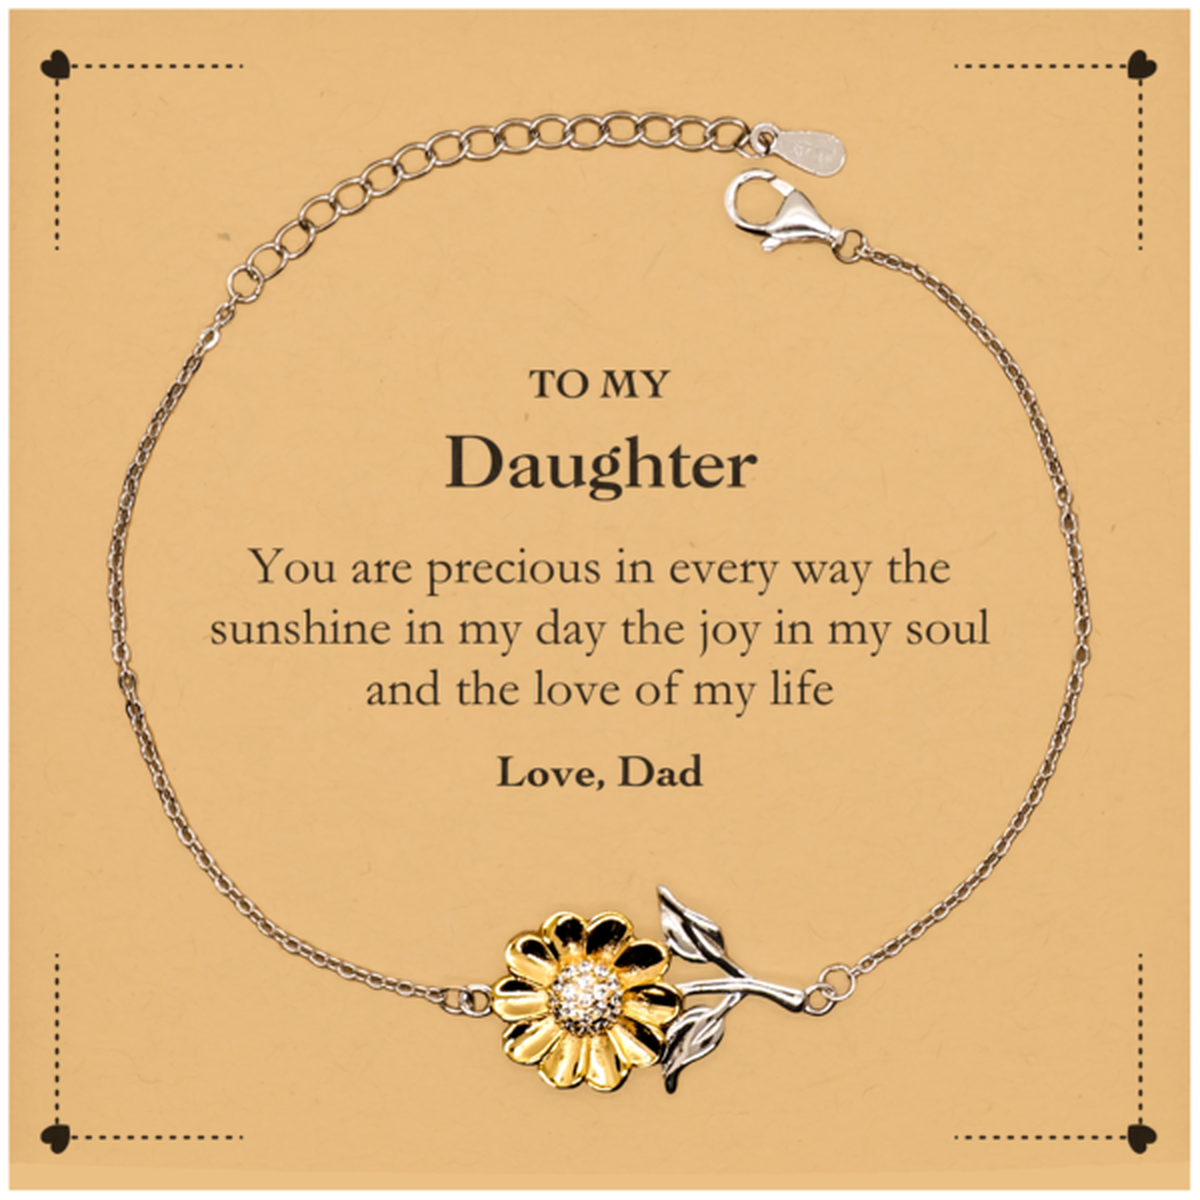 Graduation Gifts for Daughter Sunflower Bracelet Present from Dad, Christmas Daughter Birthday Gifts Daughter You are precious in every way the sunshine in my day. Love, Dad